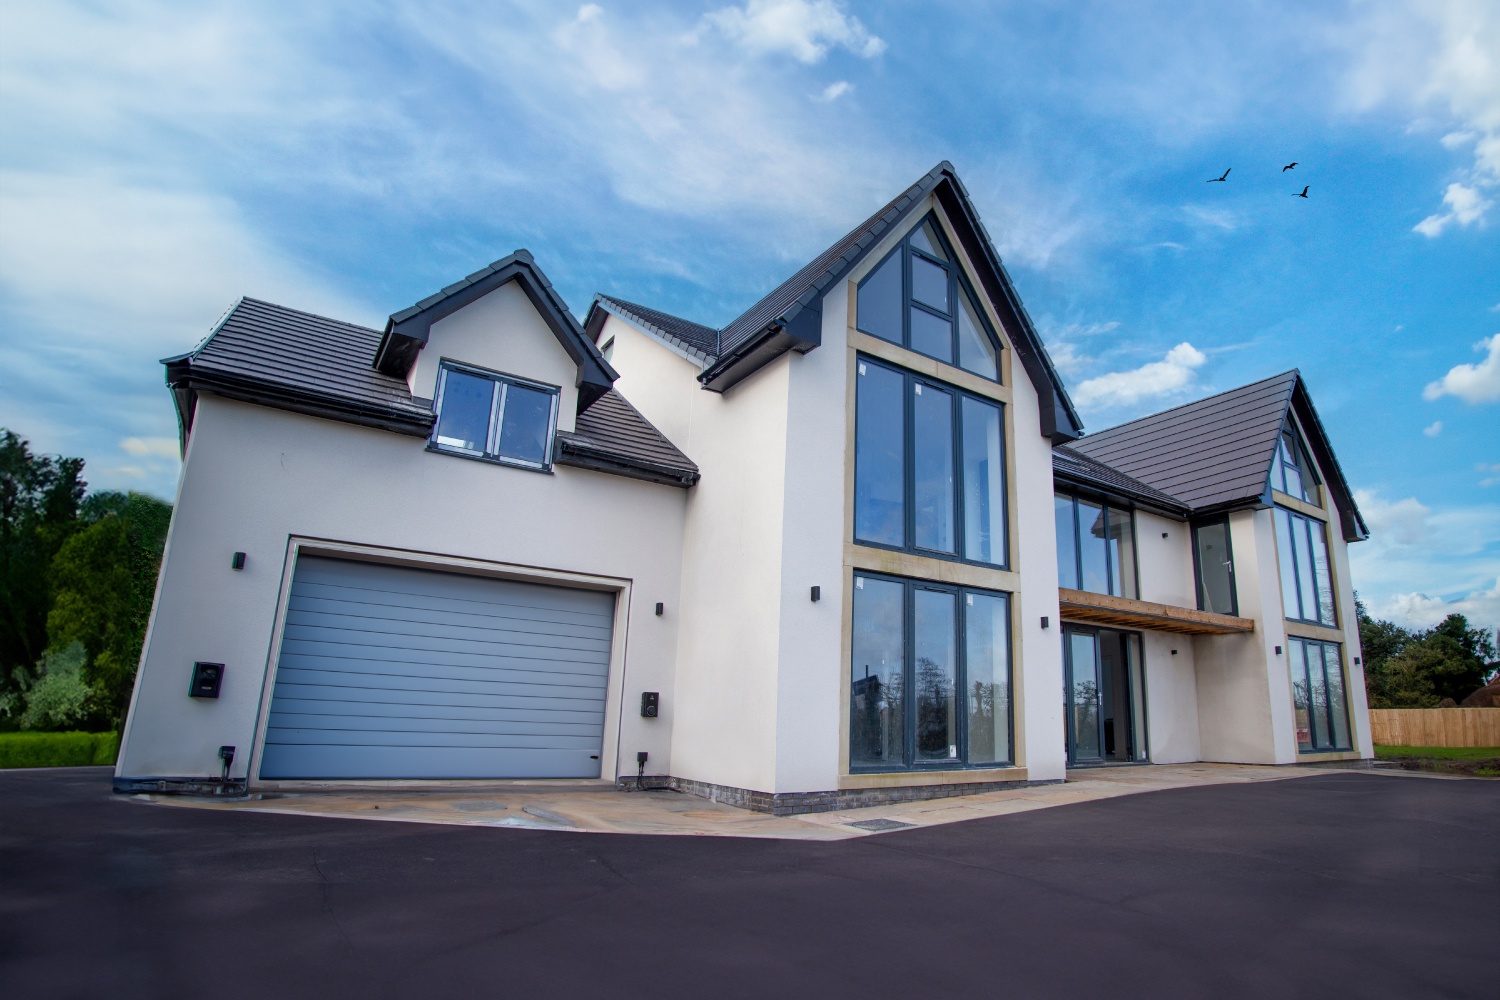 Property at Marie Thomas Homes' Cuddy Hill Development